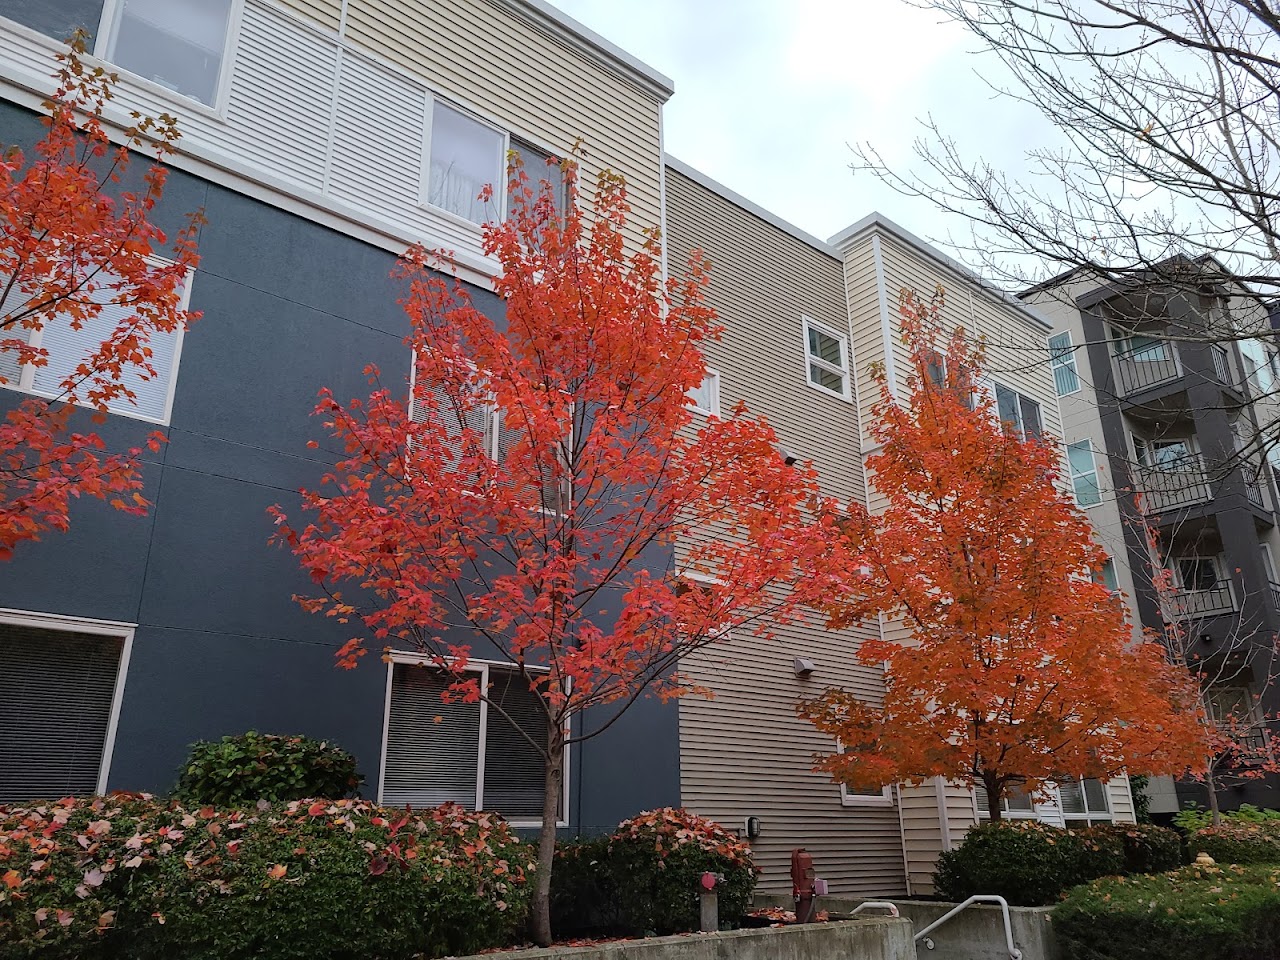 Photo of ASHWOOD COURT APARTMENTS. Affordable housing located at 11018 NE 11TH STREET BELLEVUE, WA 98004